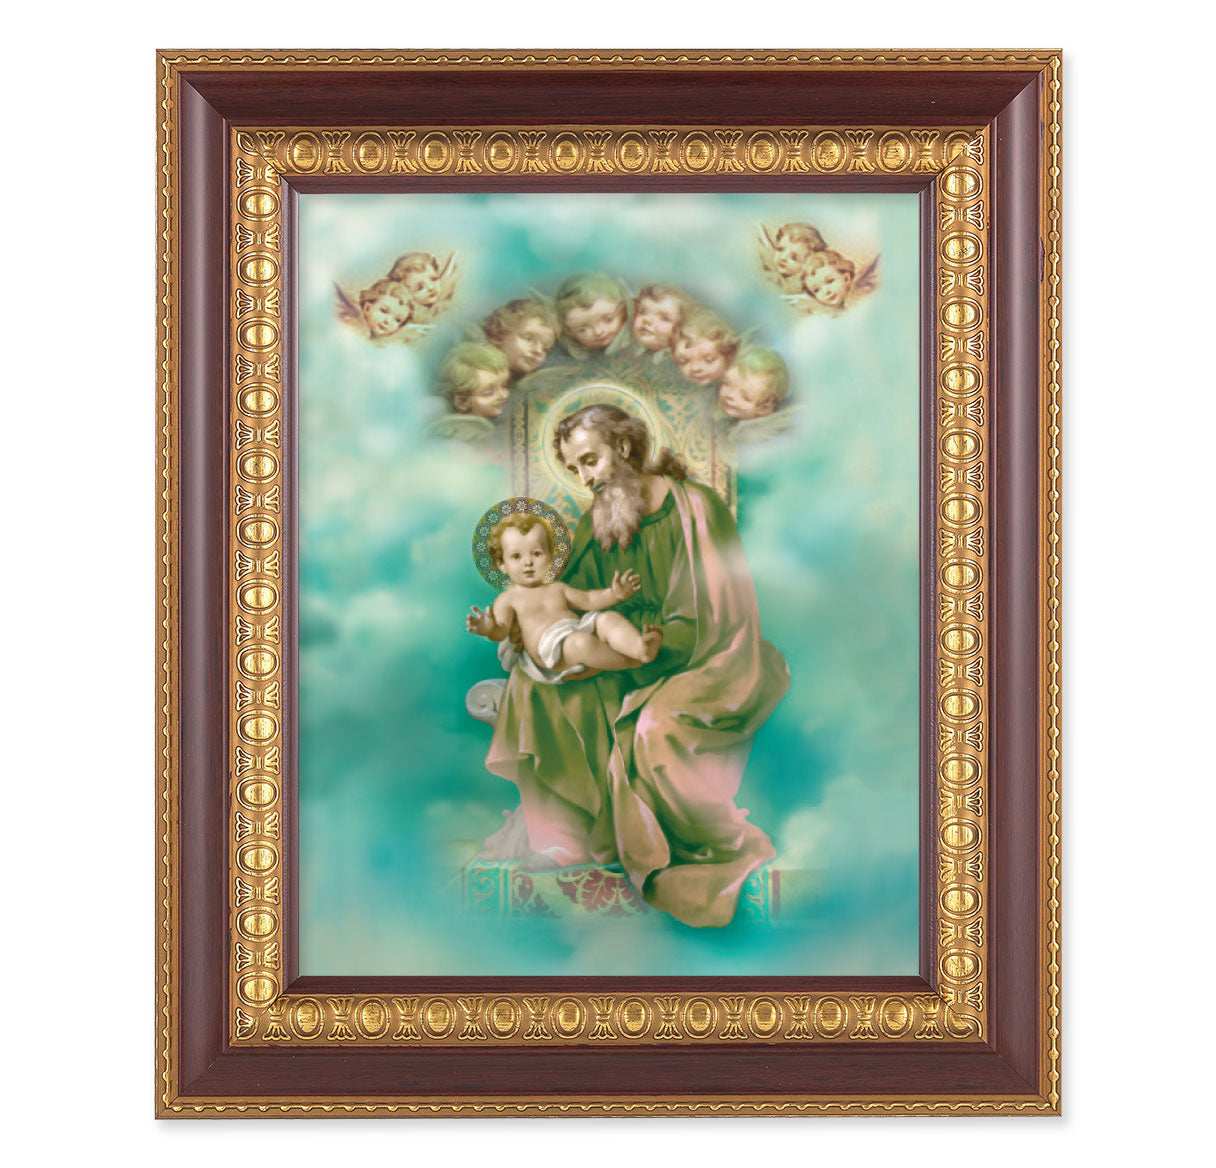 St. Joseph Picture Framed Wall Art Decor, Large, Dark Cherry with Gold Egg and Dart Detailed Frame